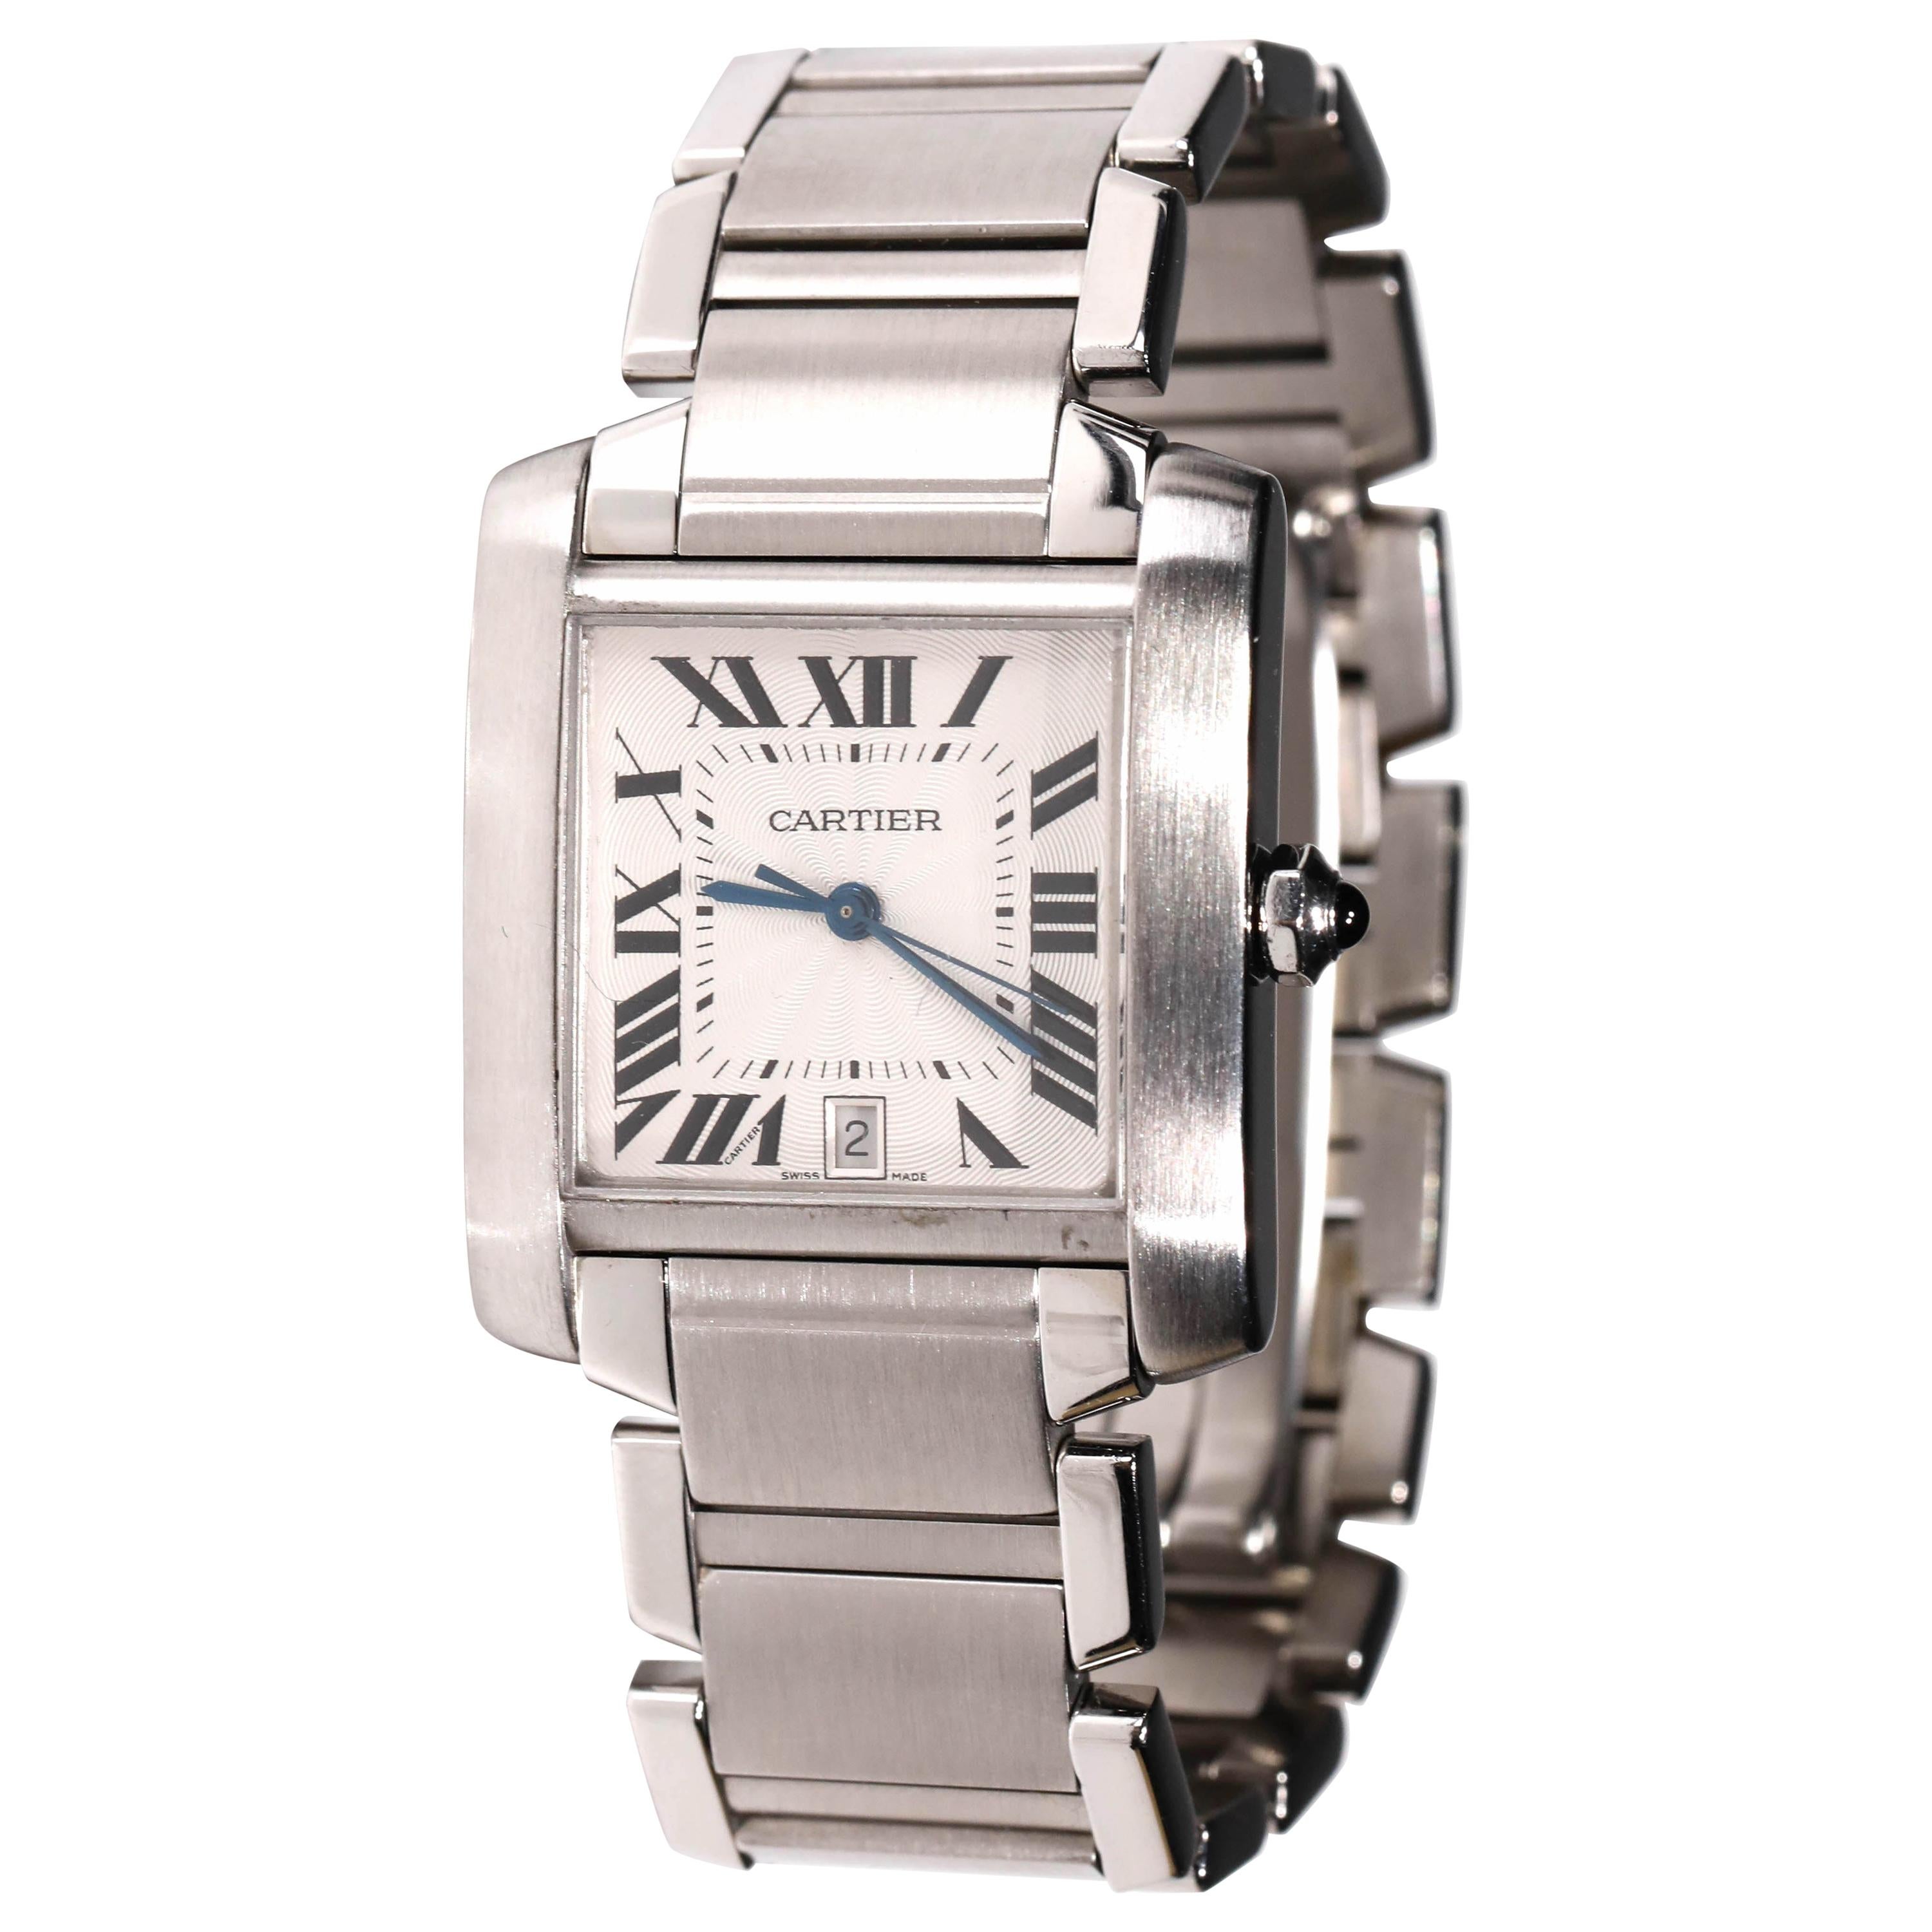 Cartier Stainless Steel Tank 2302 Francaise Automatic Men's Wristwatch